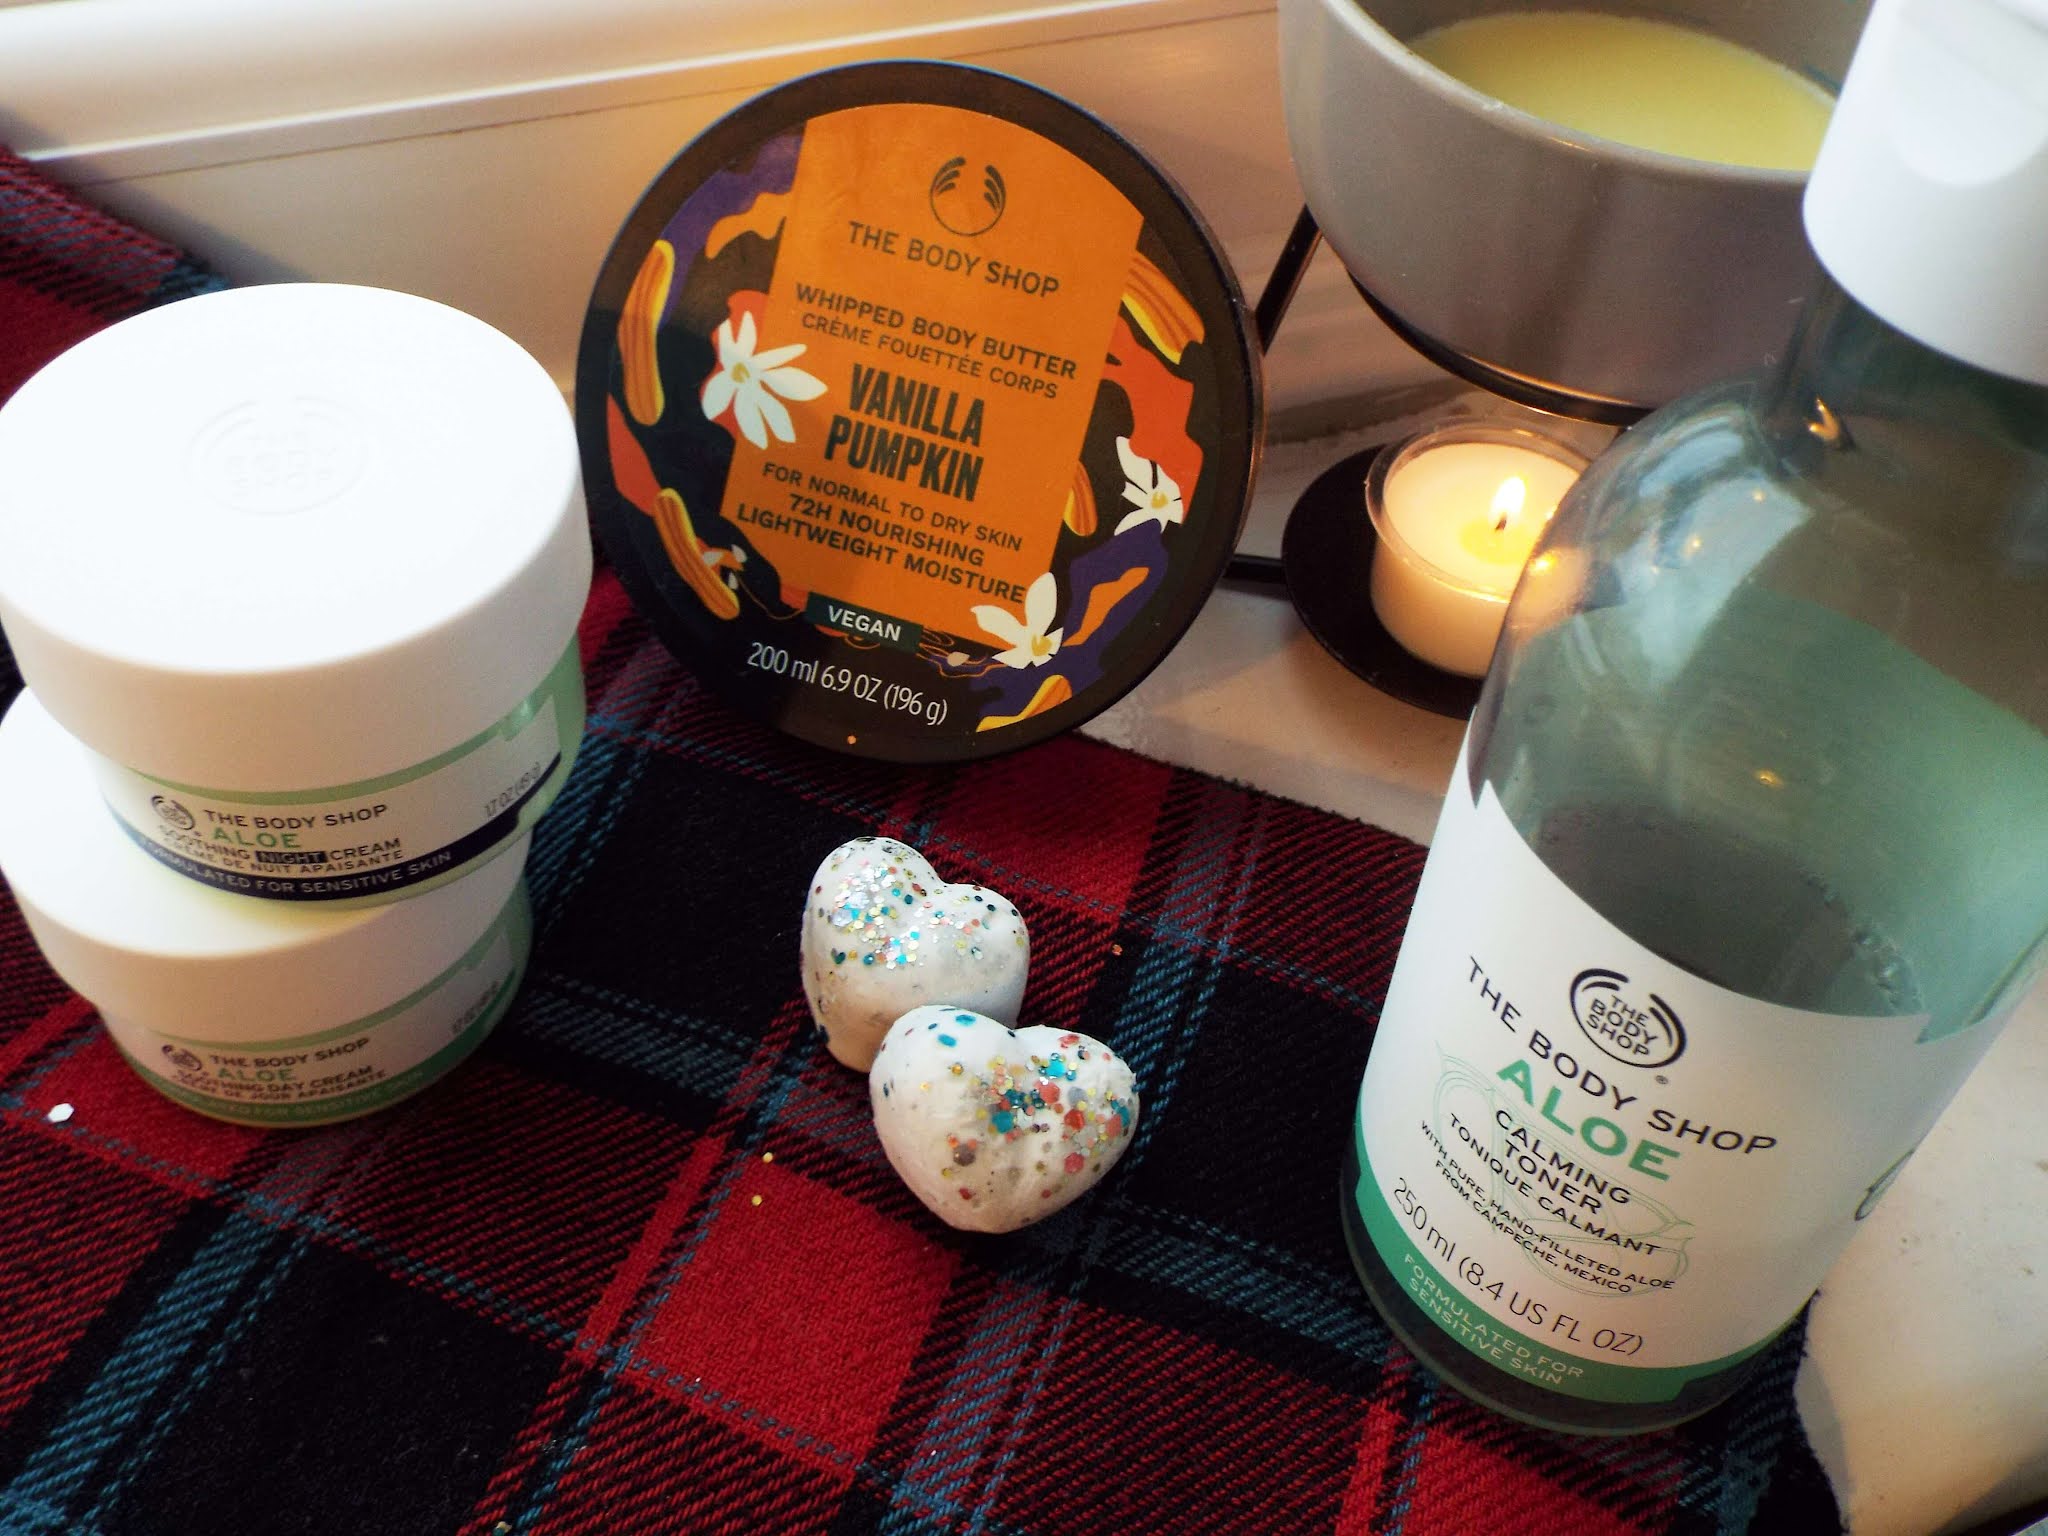 Cluster of October favourite beauty products, sat on tartan scarf in nook of windowsill, with wax melter burning away in the background.